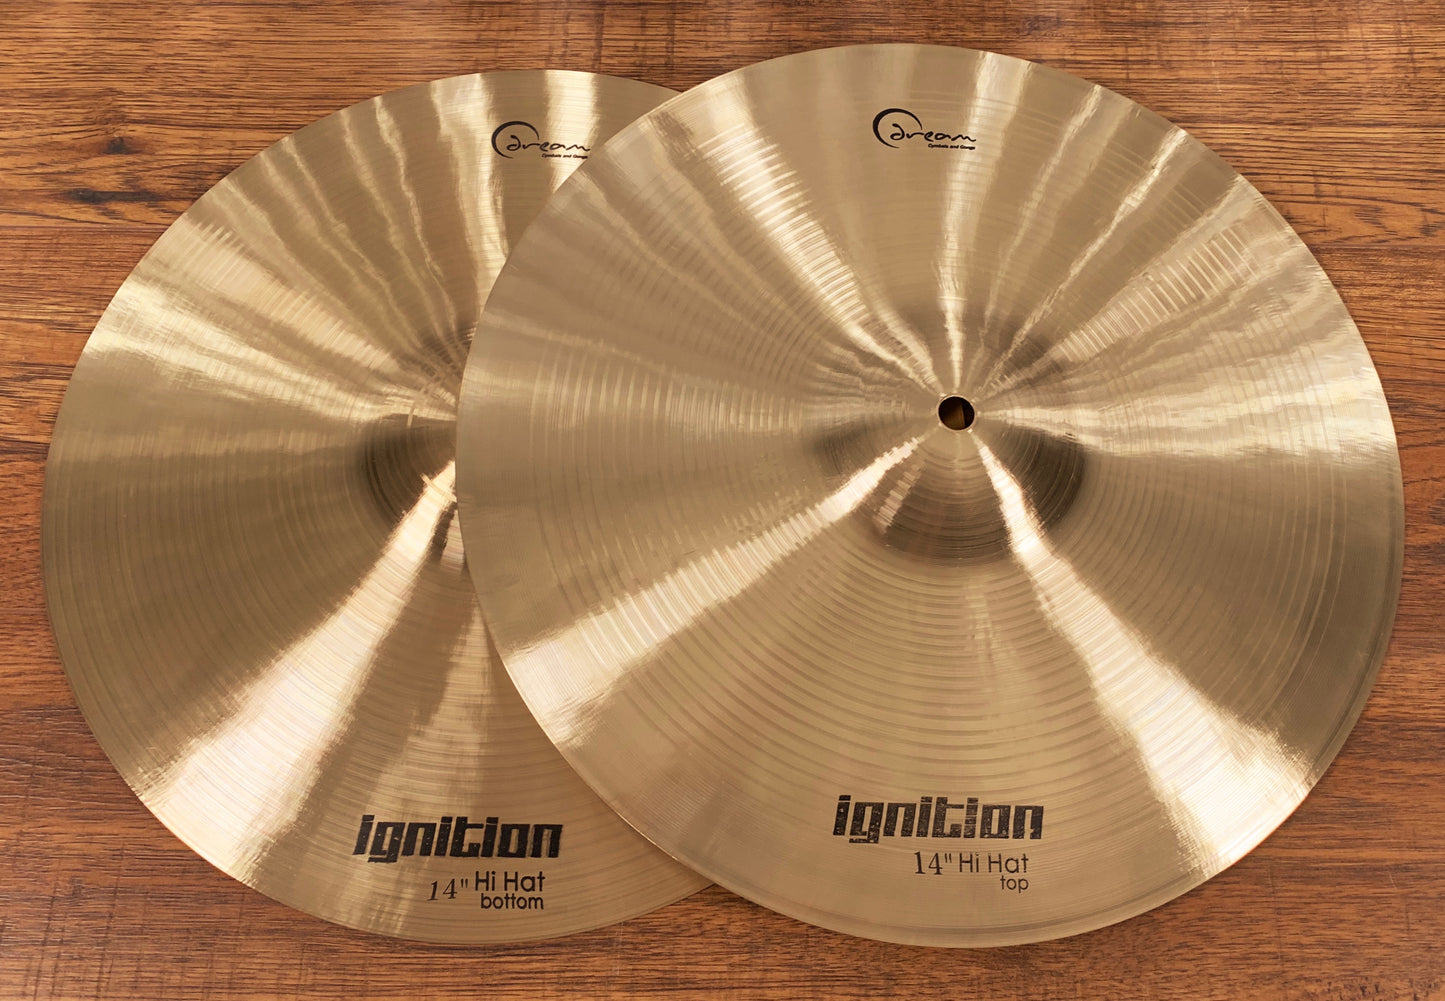 Dream Cymbals IGNCP4 Ignition Series 4 Piece Cymbal Pack & Bag